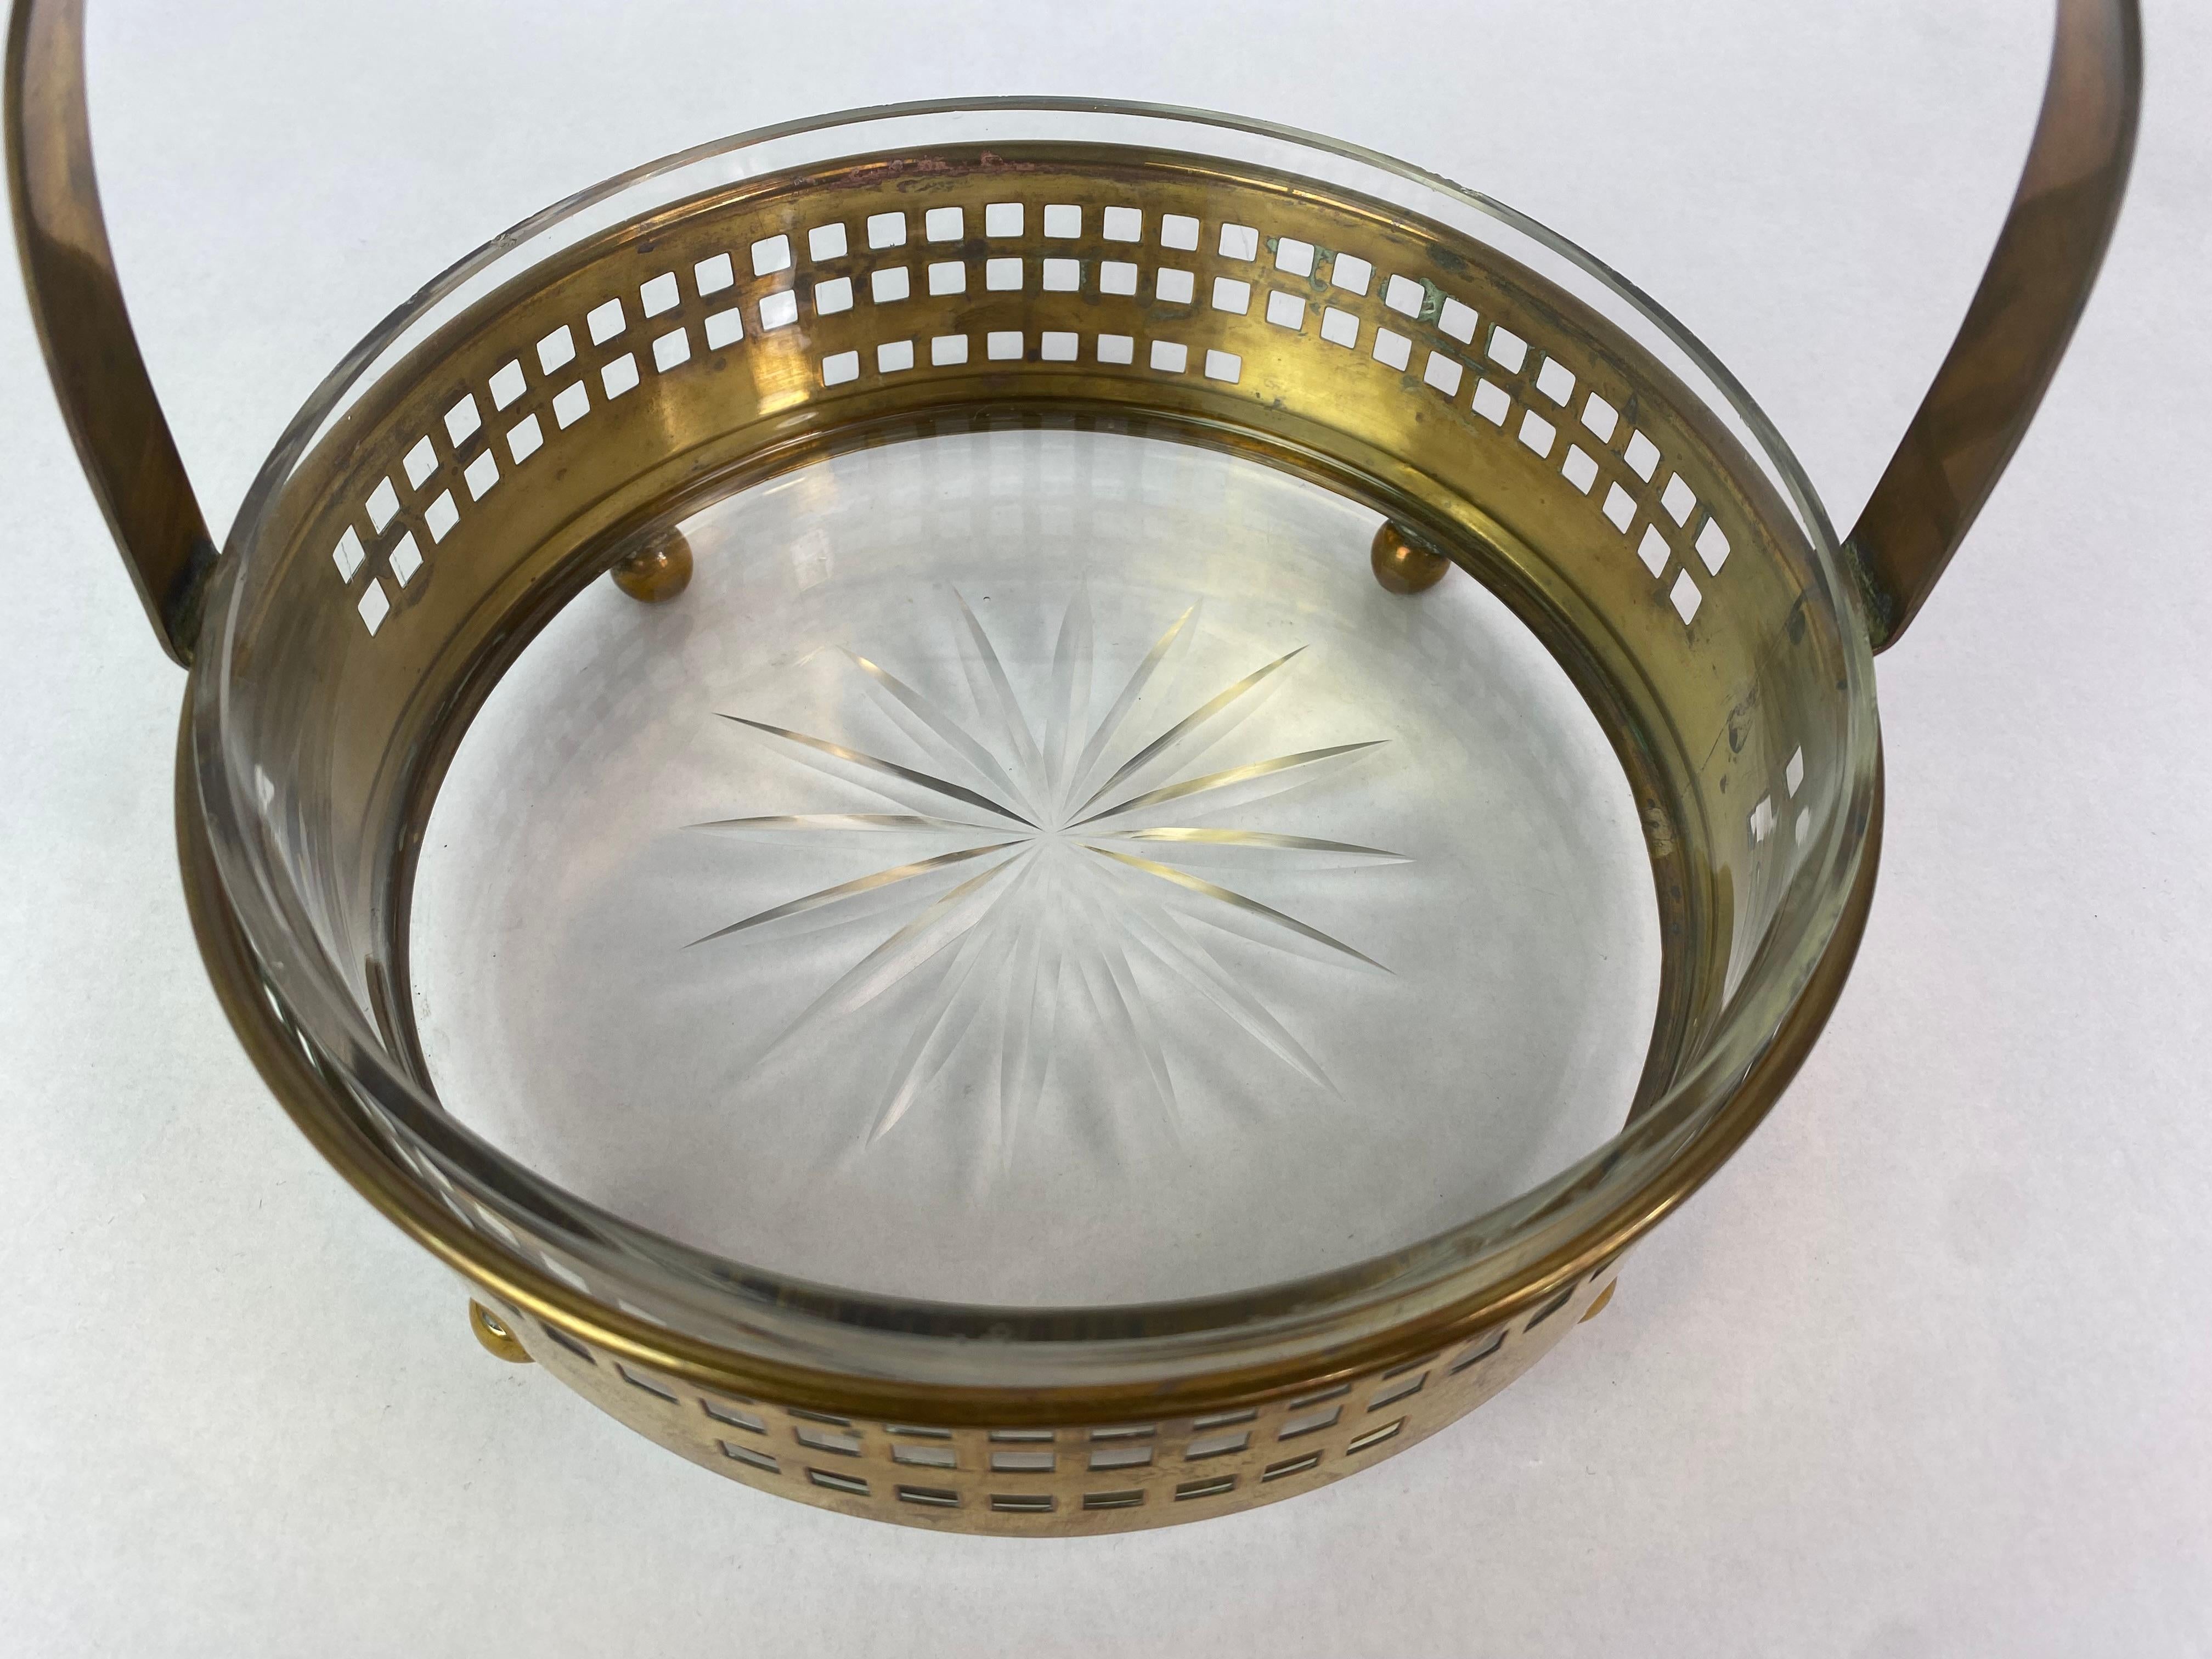 Brass secessionist baskets and toothpick holder by Hans Ofner/Josef Hoffmann For Sale 2